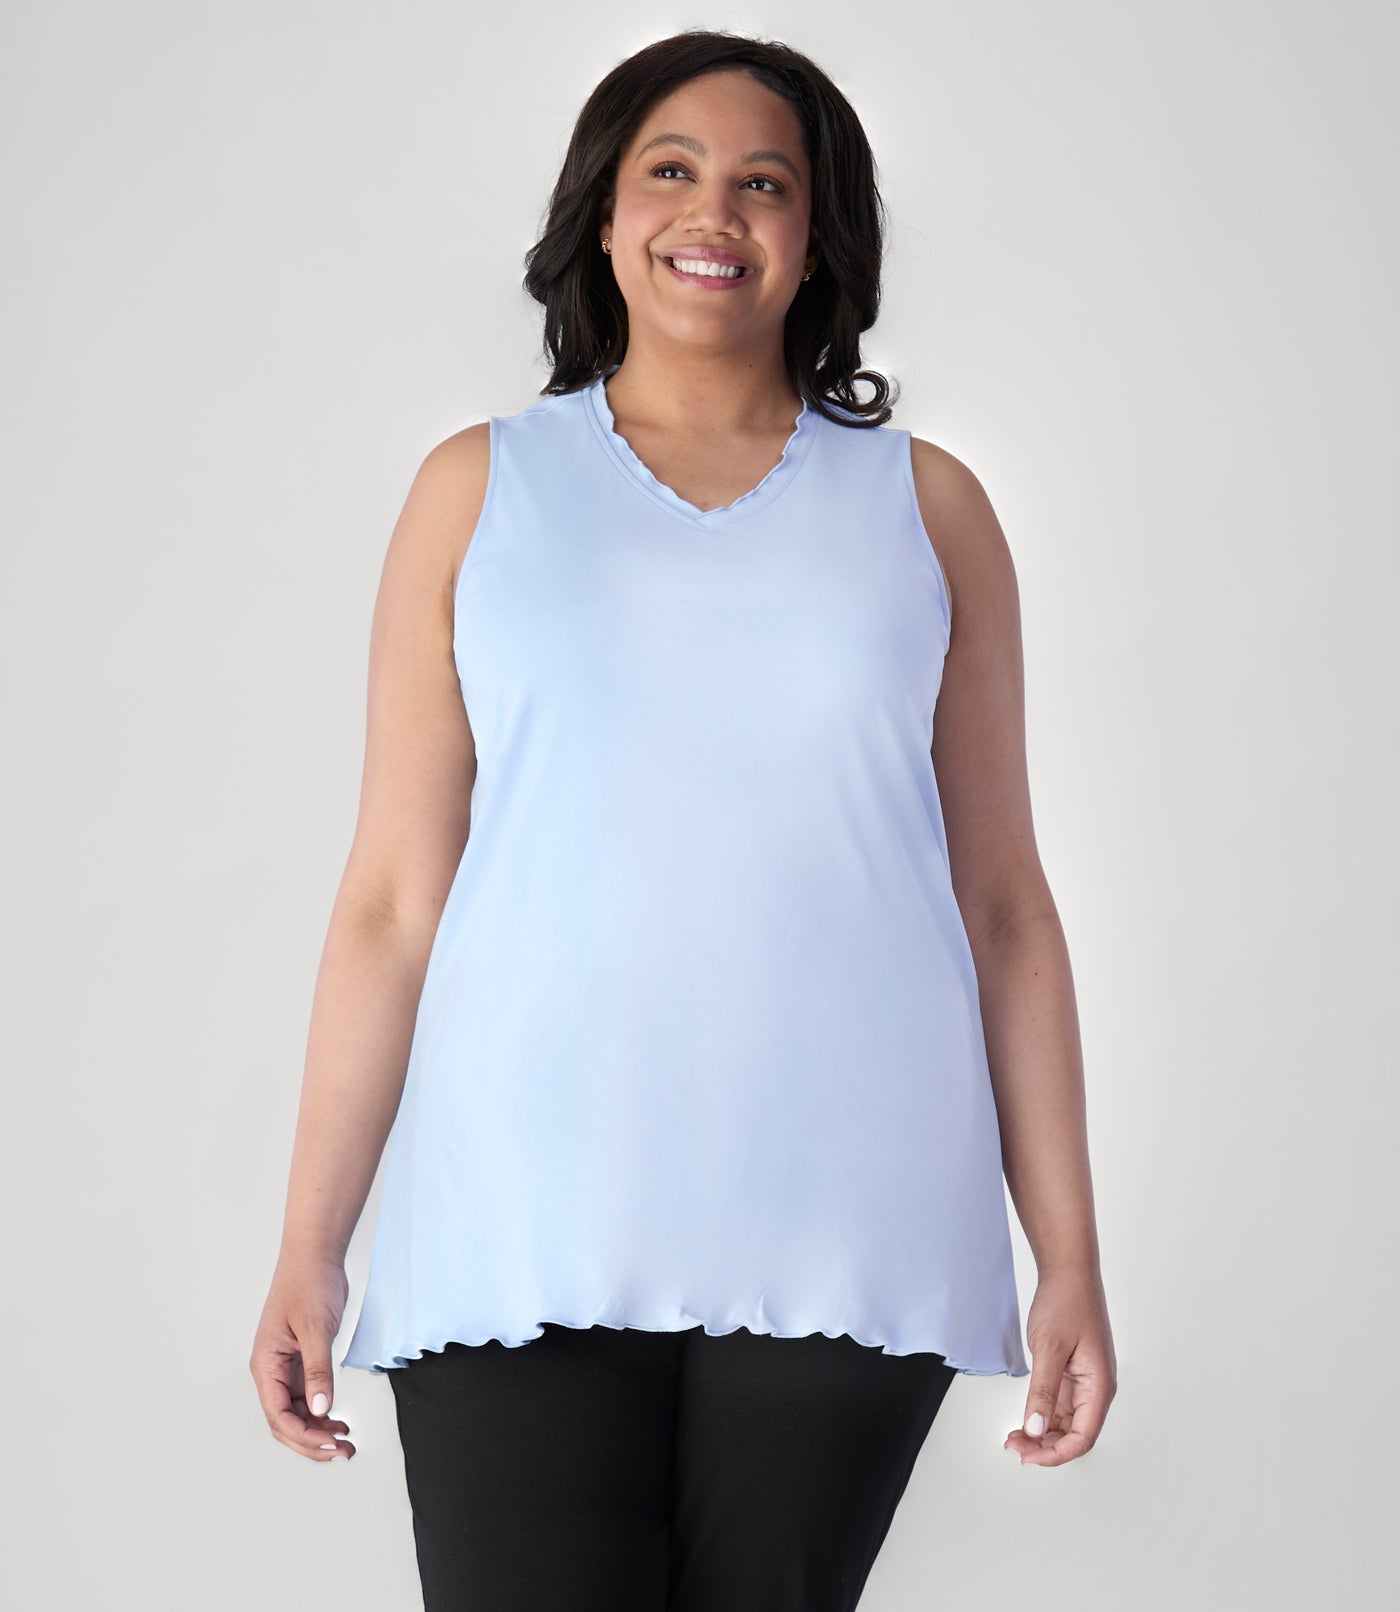 Model, facing front, wearing JunoActive's Cotton Chic Let's Trim Sleeveless plus size top in color sky blue.